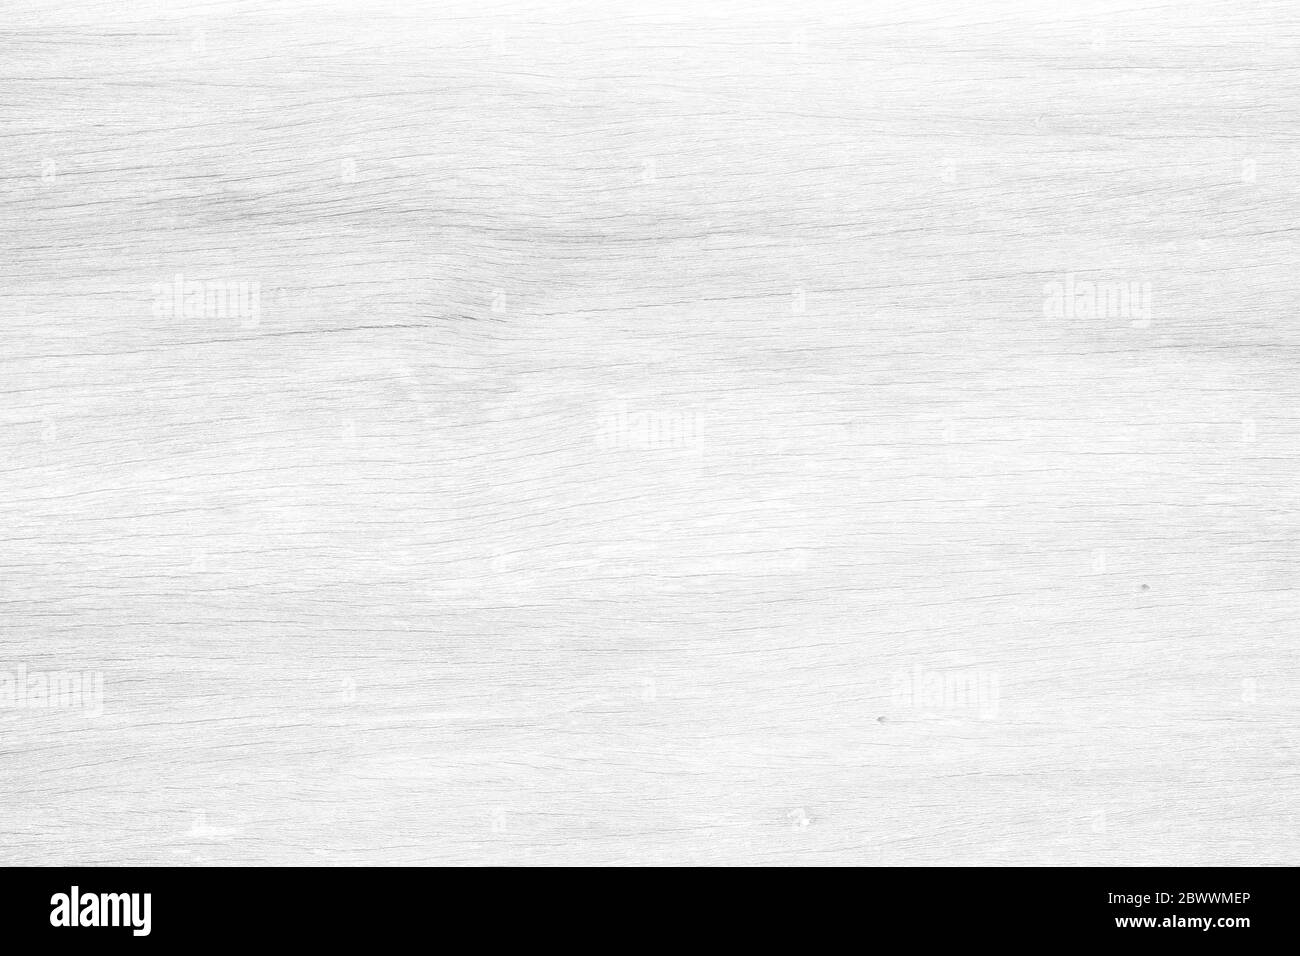 Old White Wooden Board Texture Background. Stock Photo